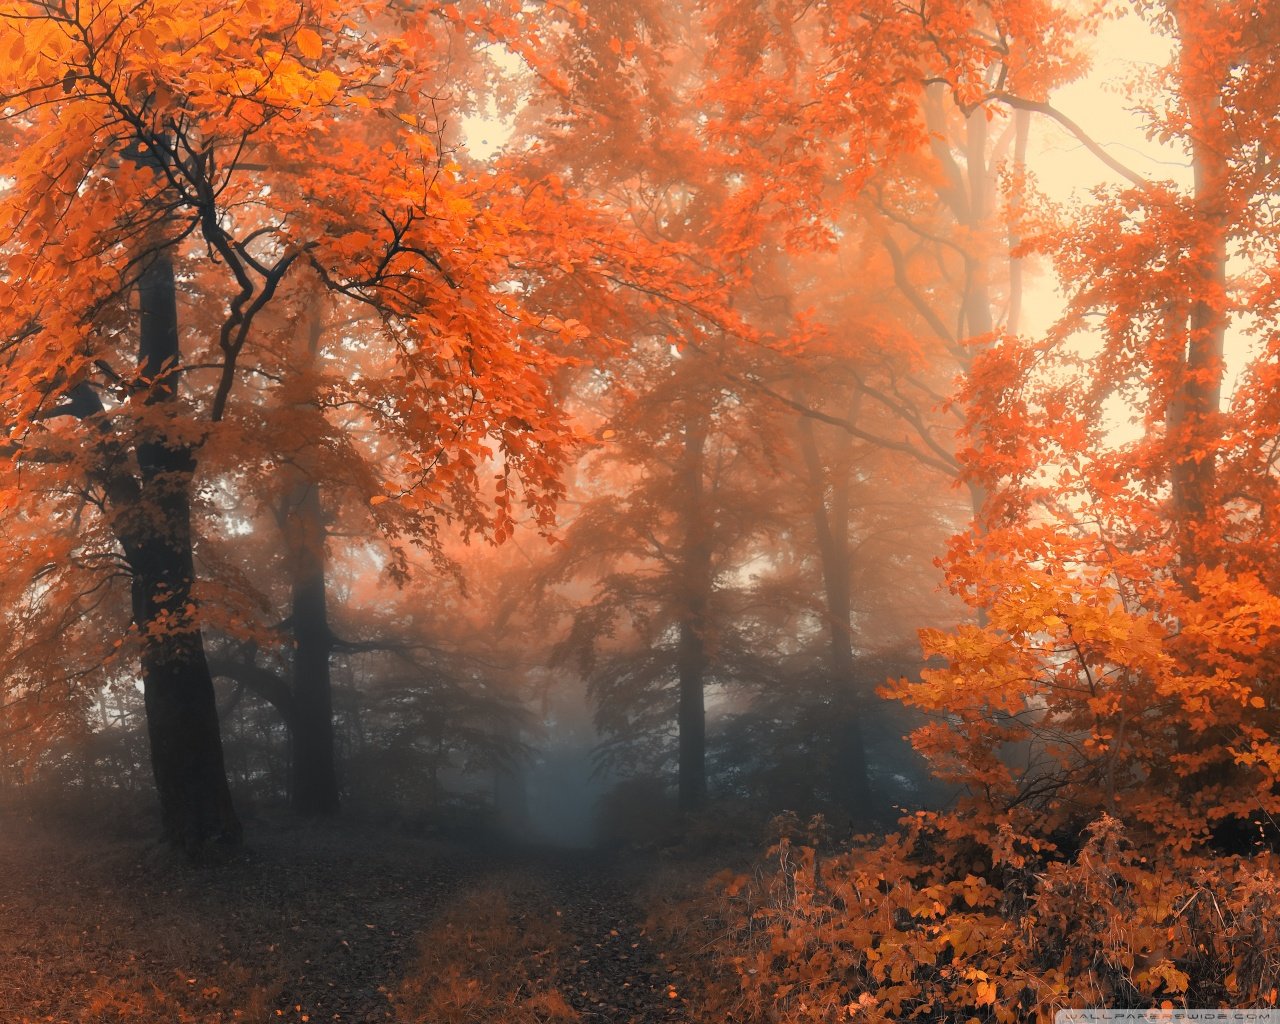 Autumn Ultra HD Desktop Background Wallpaper for: Multi Display, Dual Monitor, Tablet